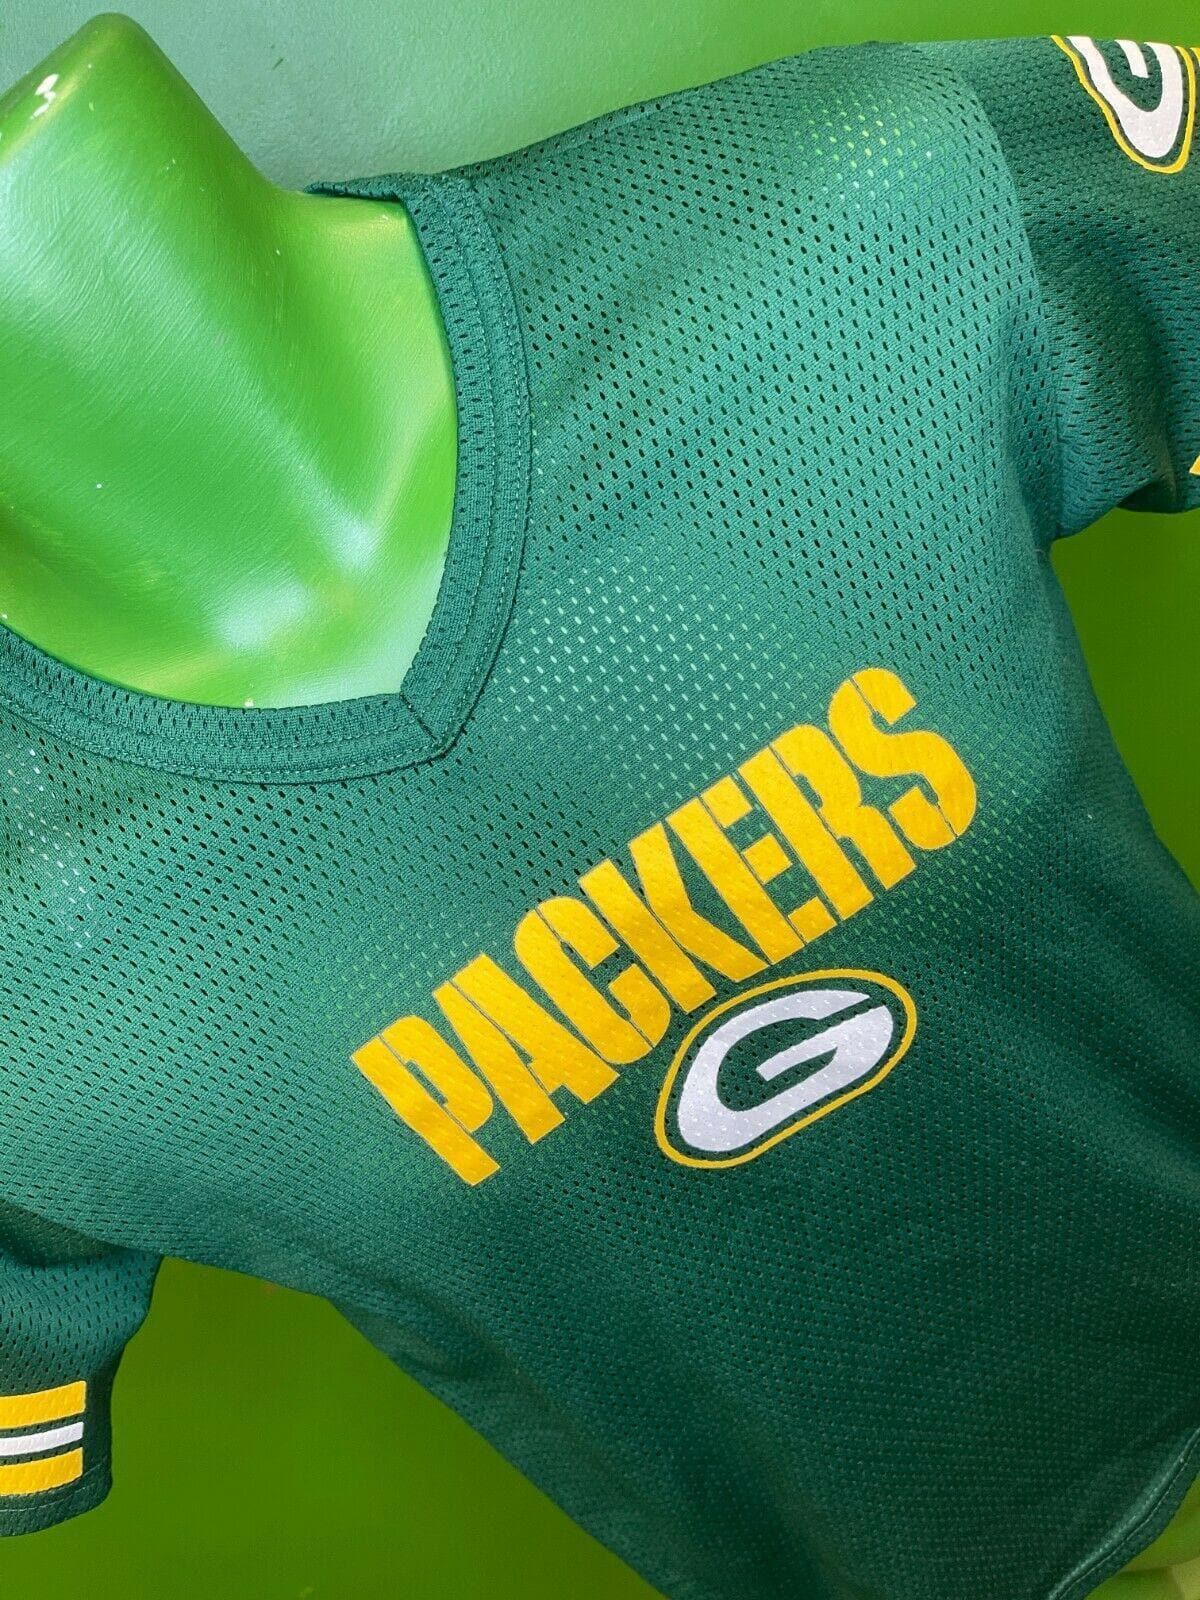 NFL Green Bay Packers Franklin Mesh Jersey Youth Large 14-16